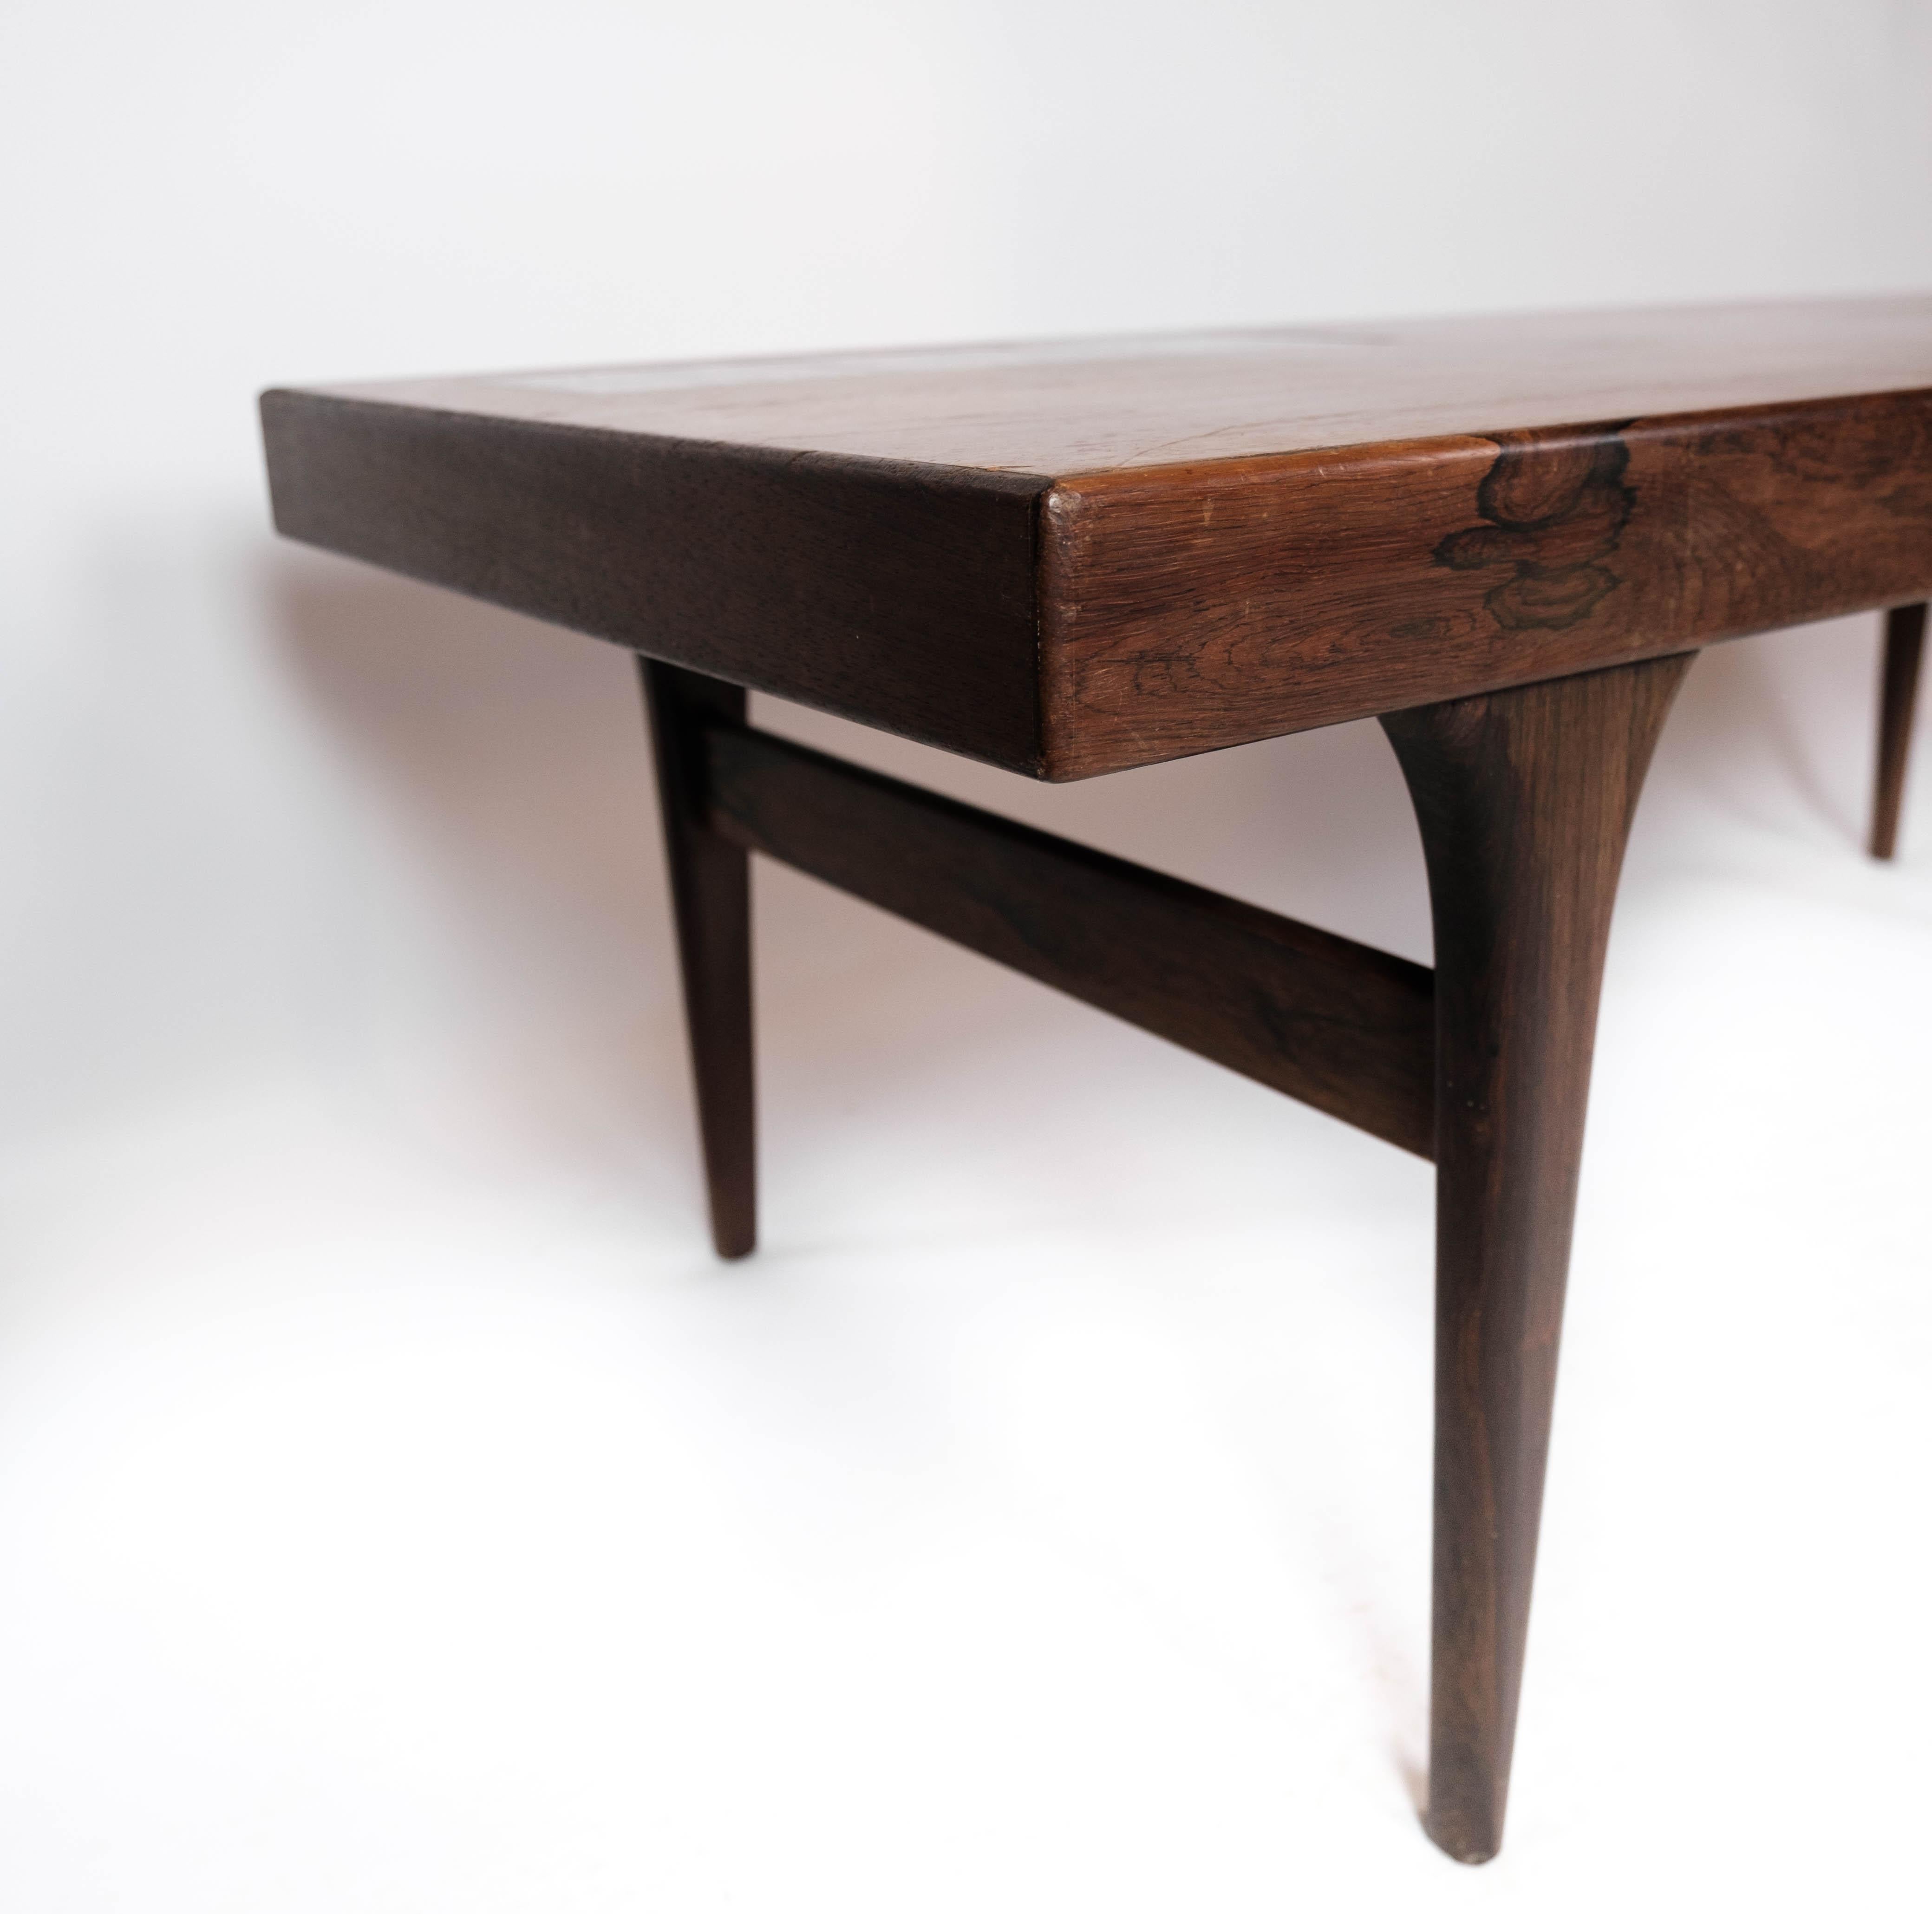 Mid-20th Century Coffee Table Made In Rosewood With Blue Tiles by Johannes Andersen From 1960s For Sale